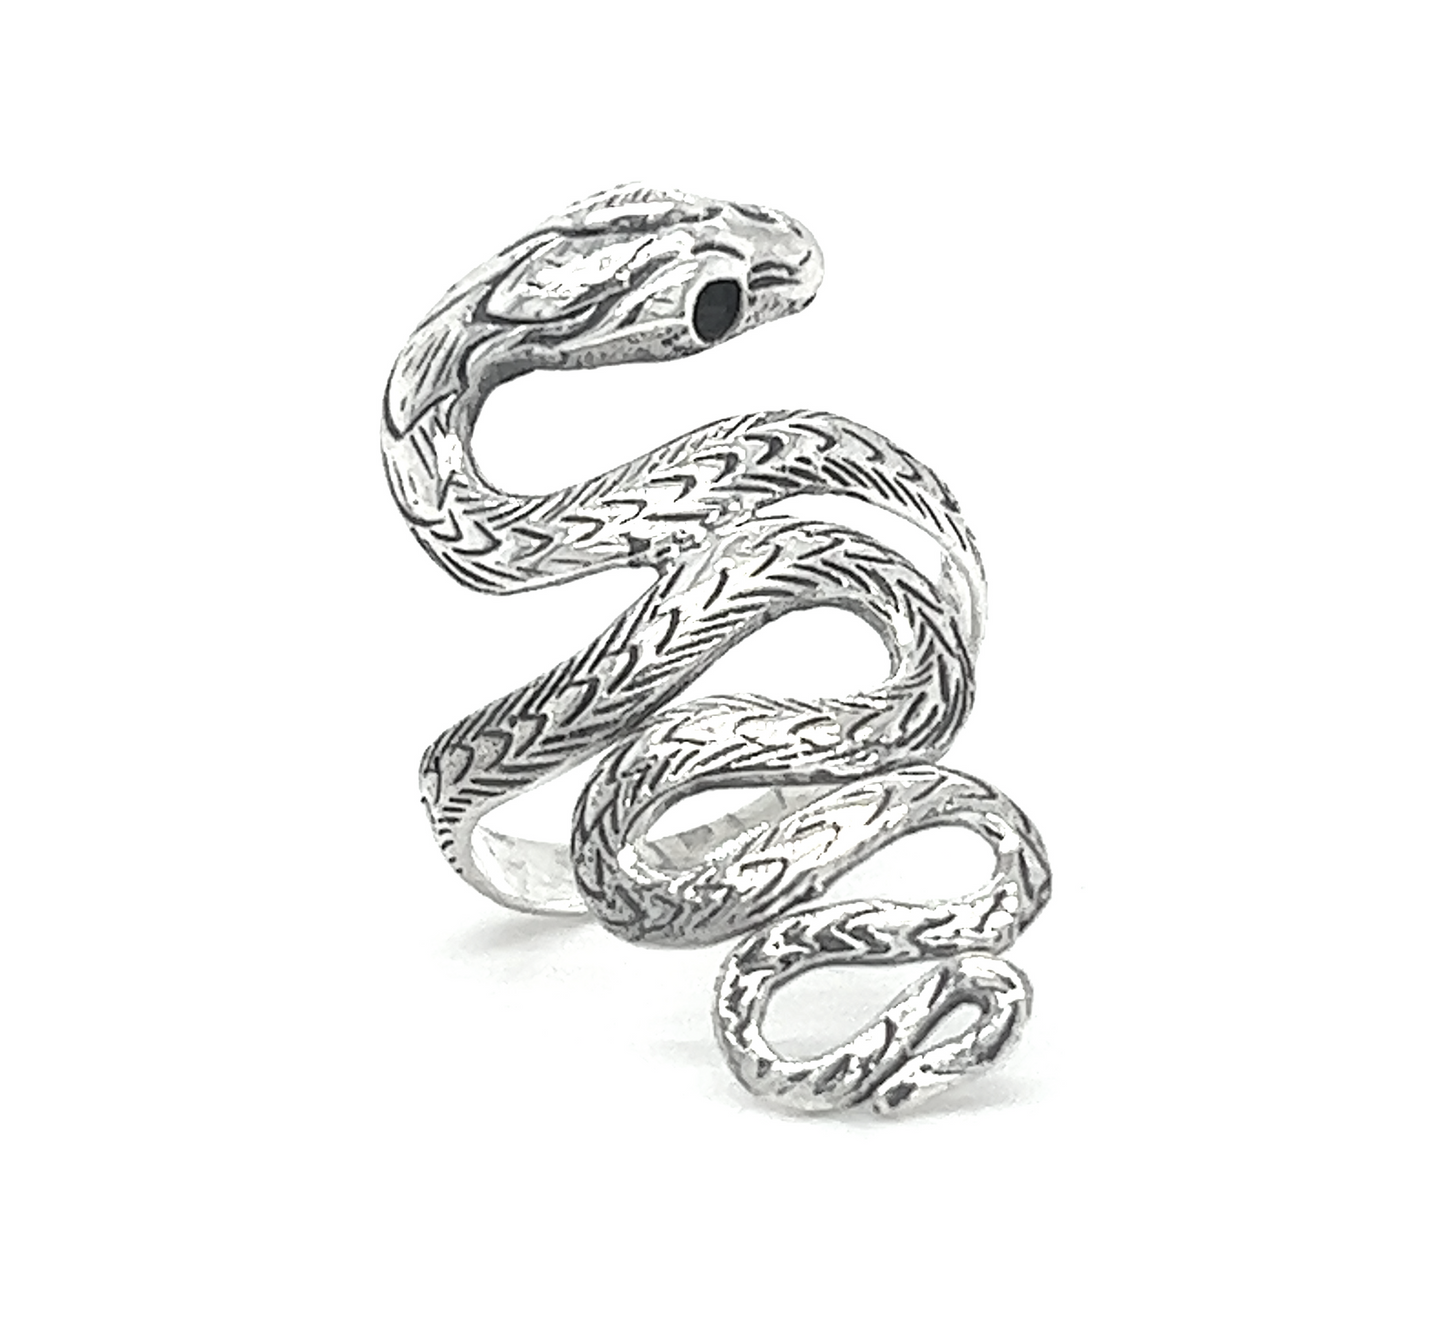 A Captivating Snake Statement Ring on a white background with intricate detailing.